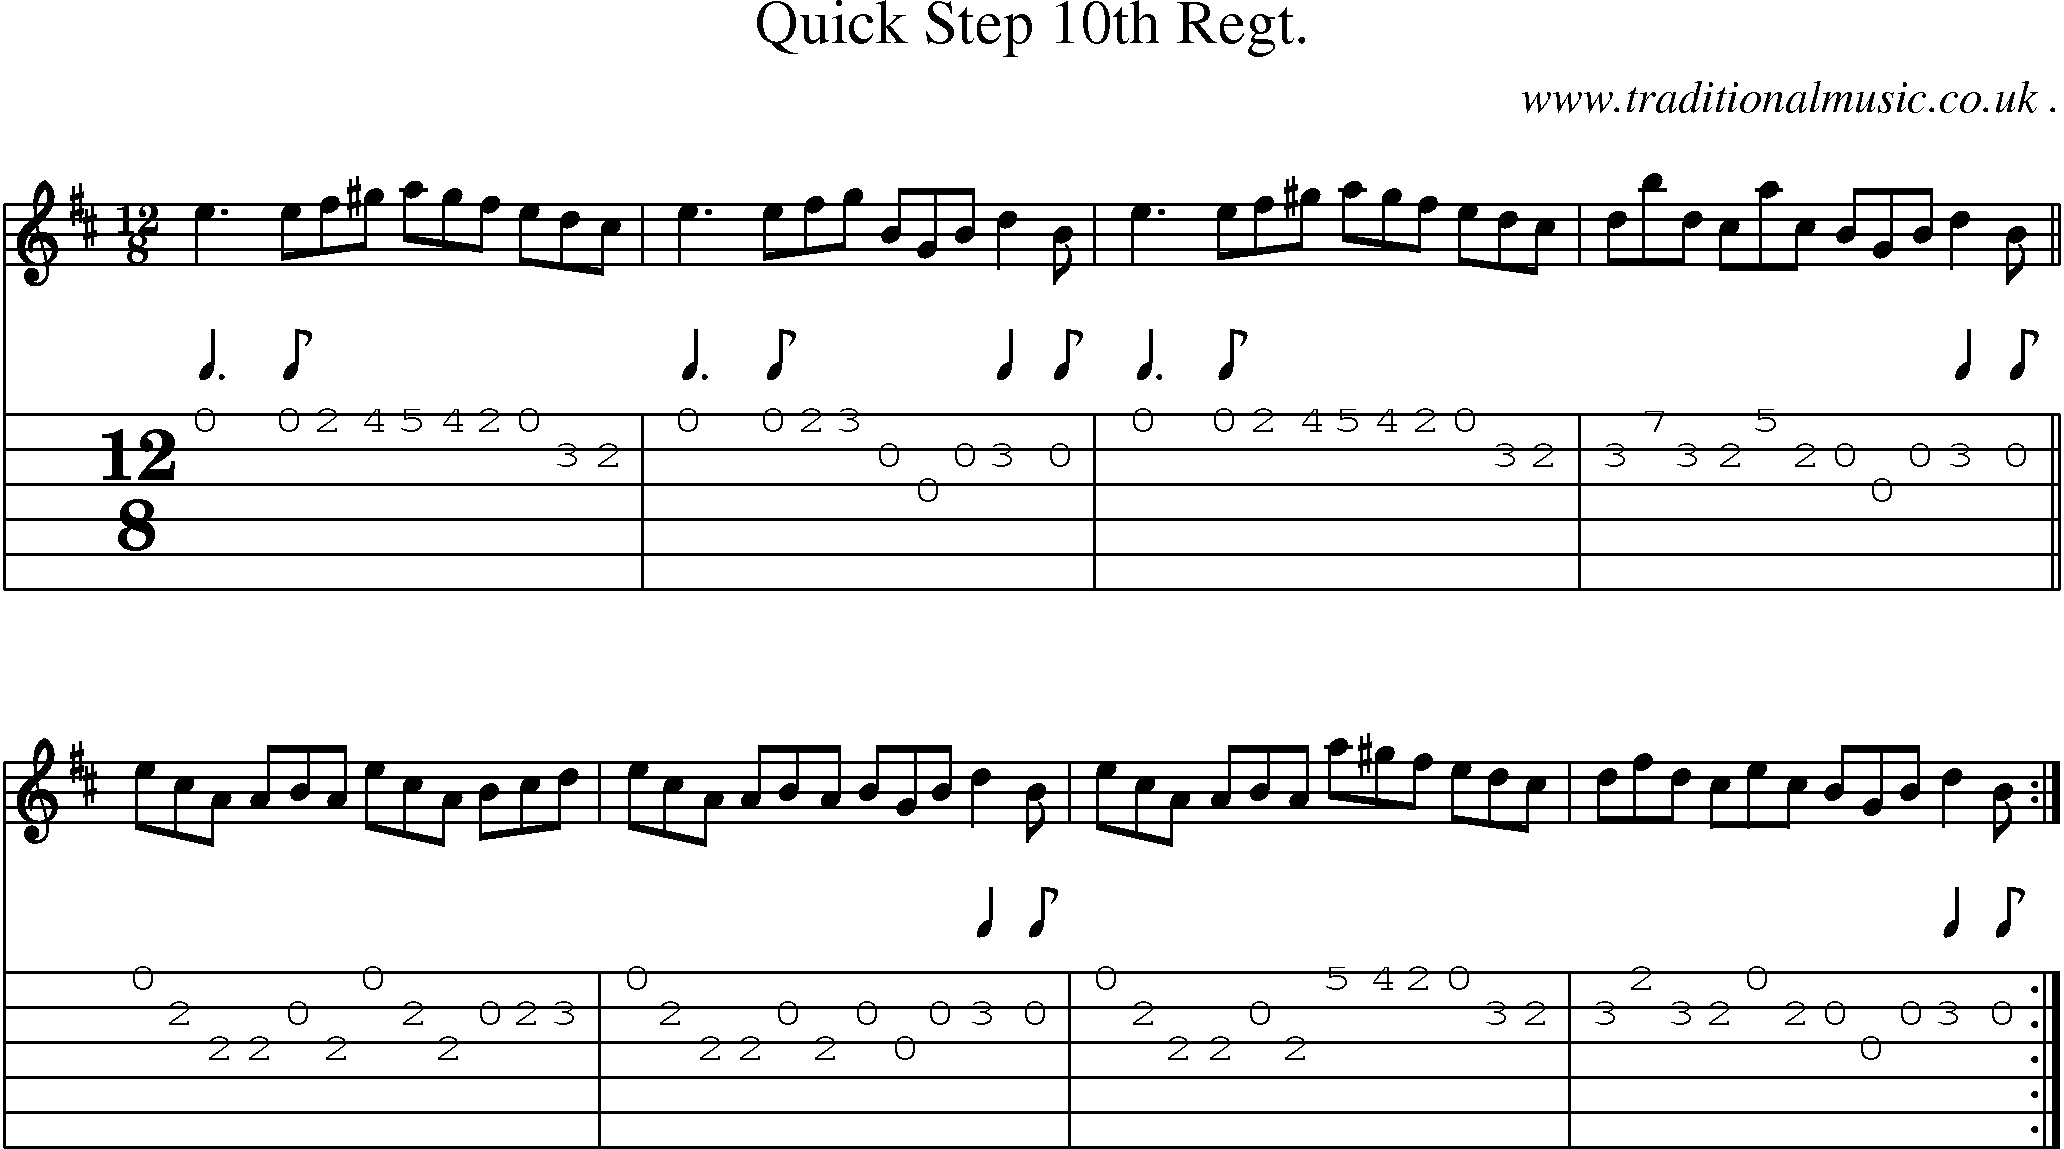 Sheet-music  score, Chords and Guitar Tabs for Quick Step 10th Regt